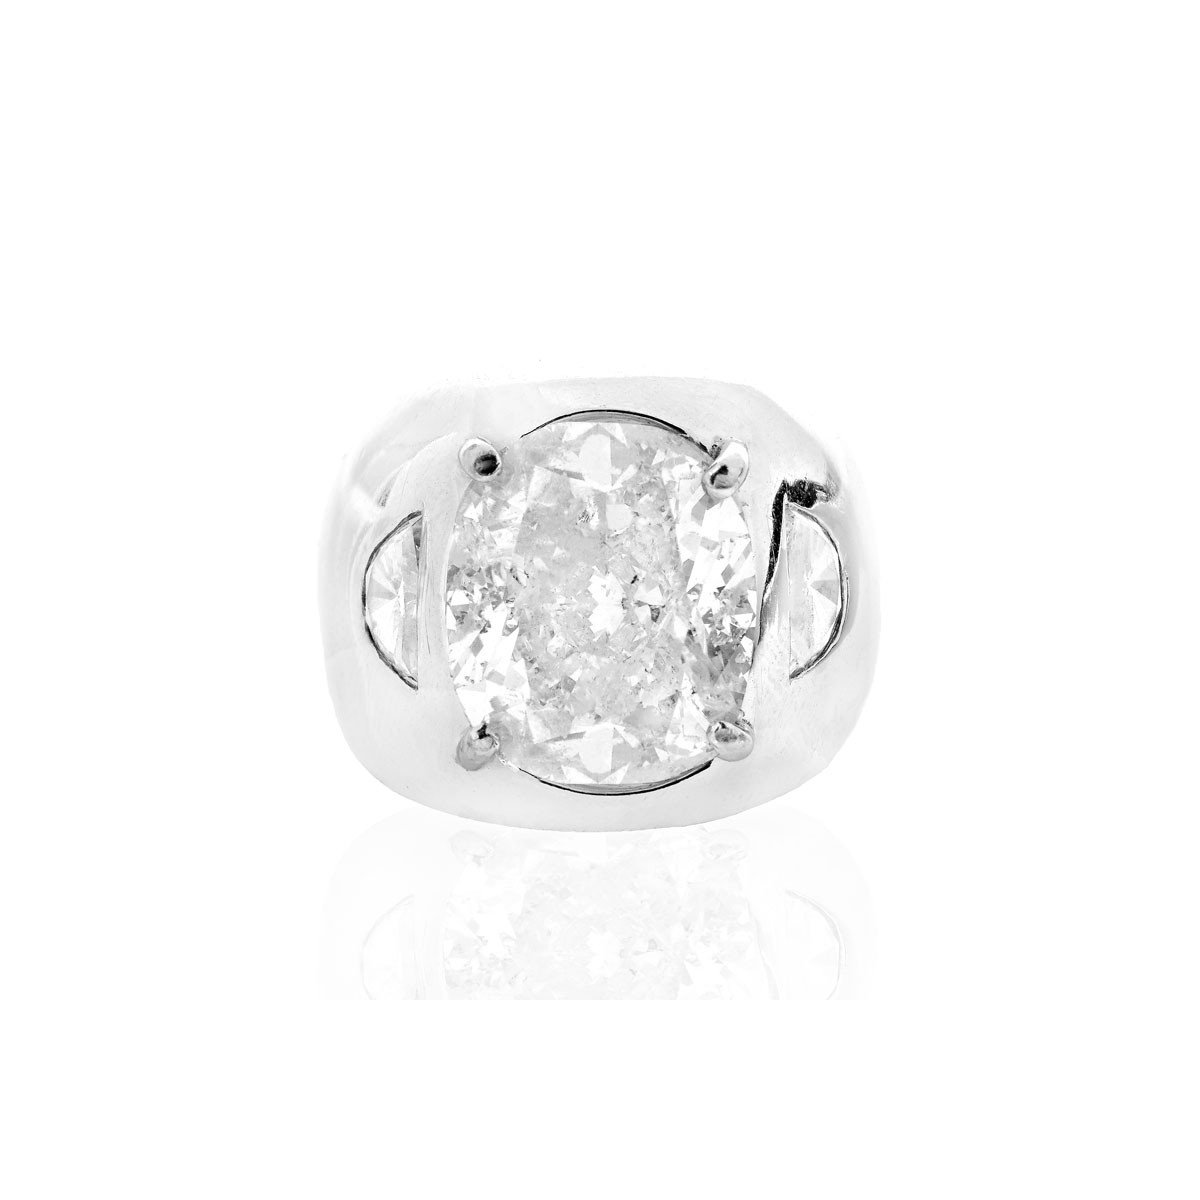 Important 14.29 Carat Oval Brilliant Cut Prong Set Diamond and Heavy 14 Karat White Gold Tapered Domed Band Design Ring.